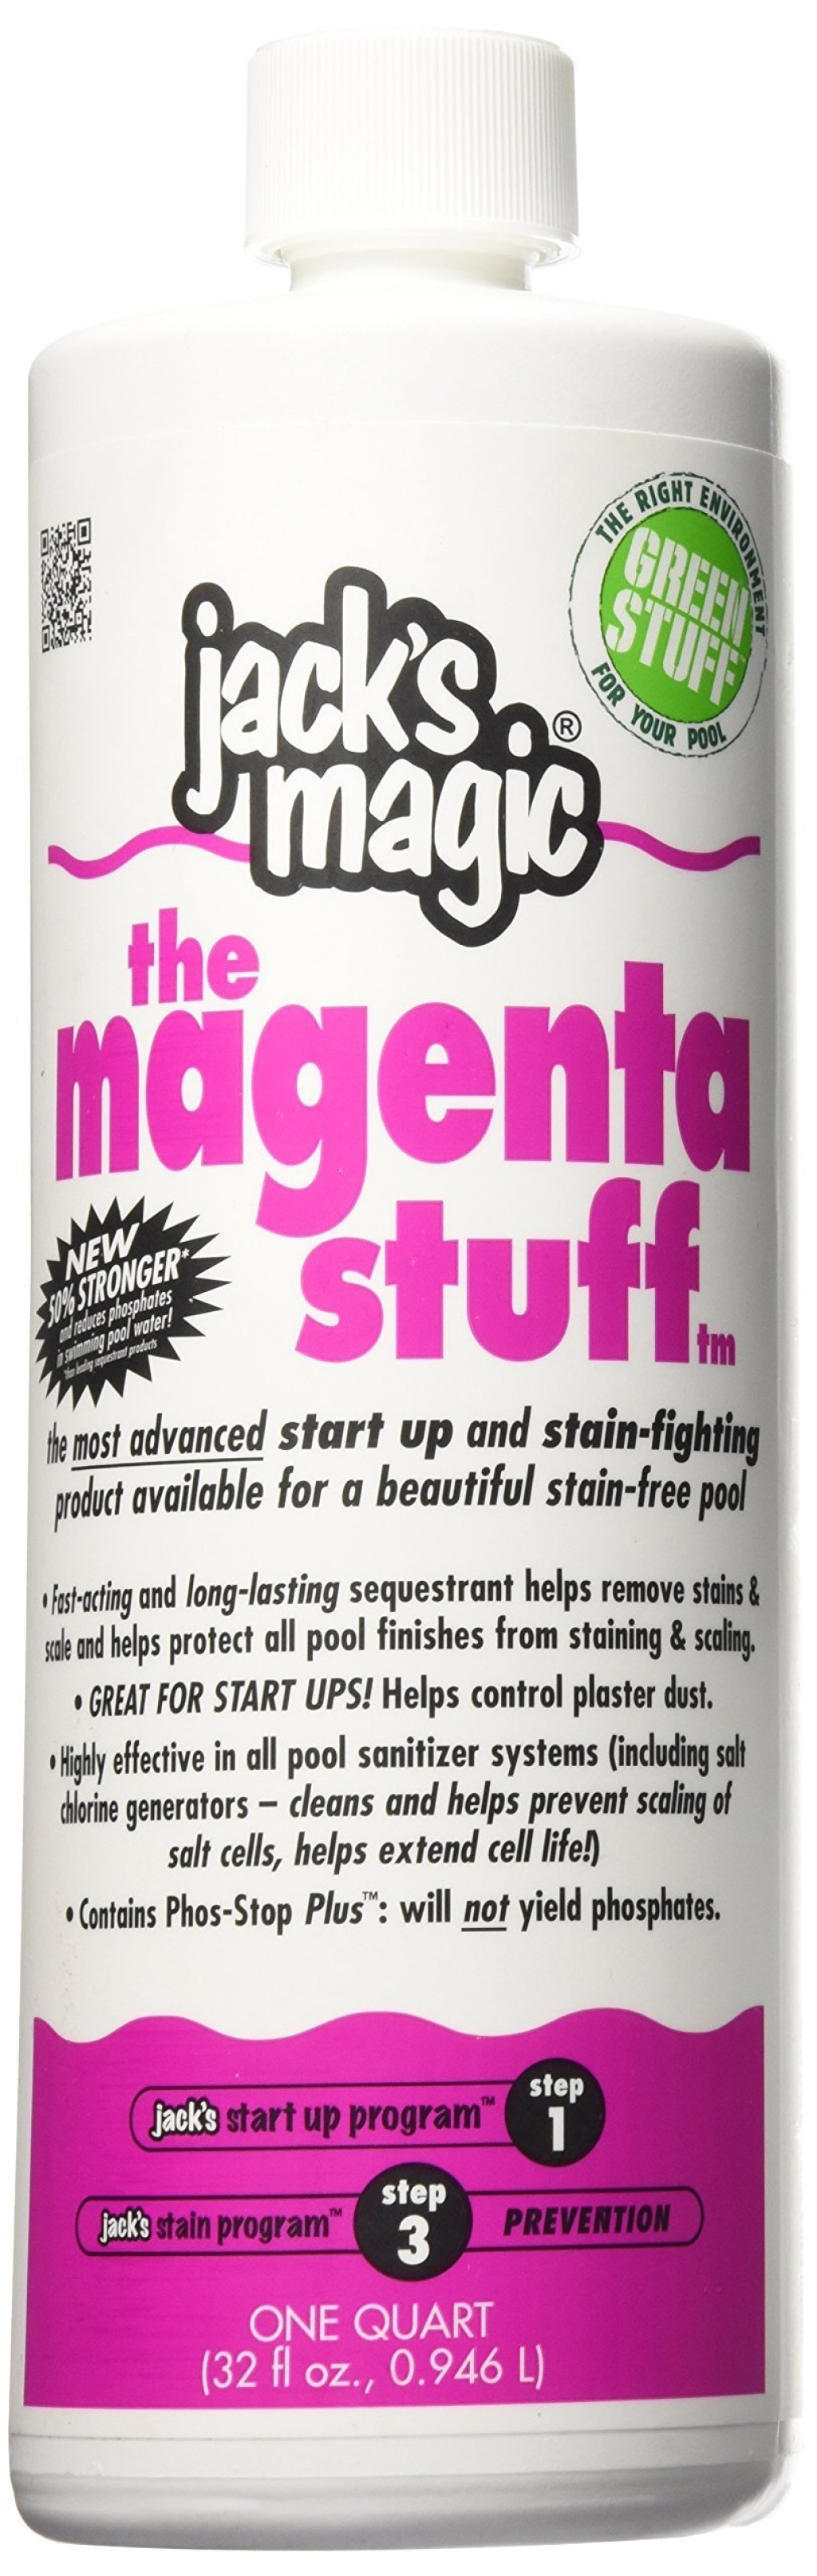 Picture of: Jack’s Magic The Magenta Stuff Size:  Ounce